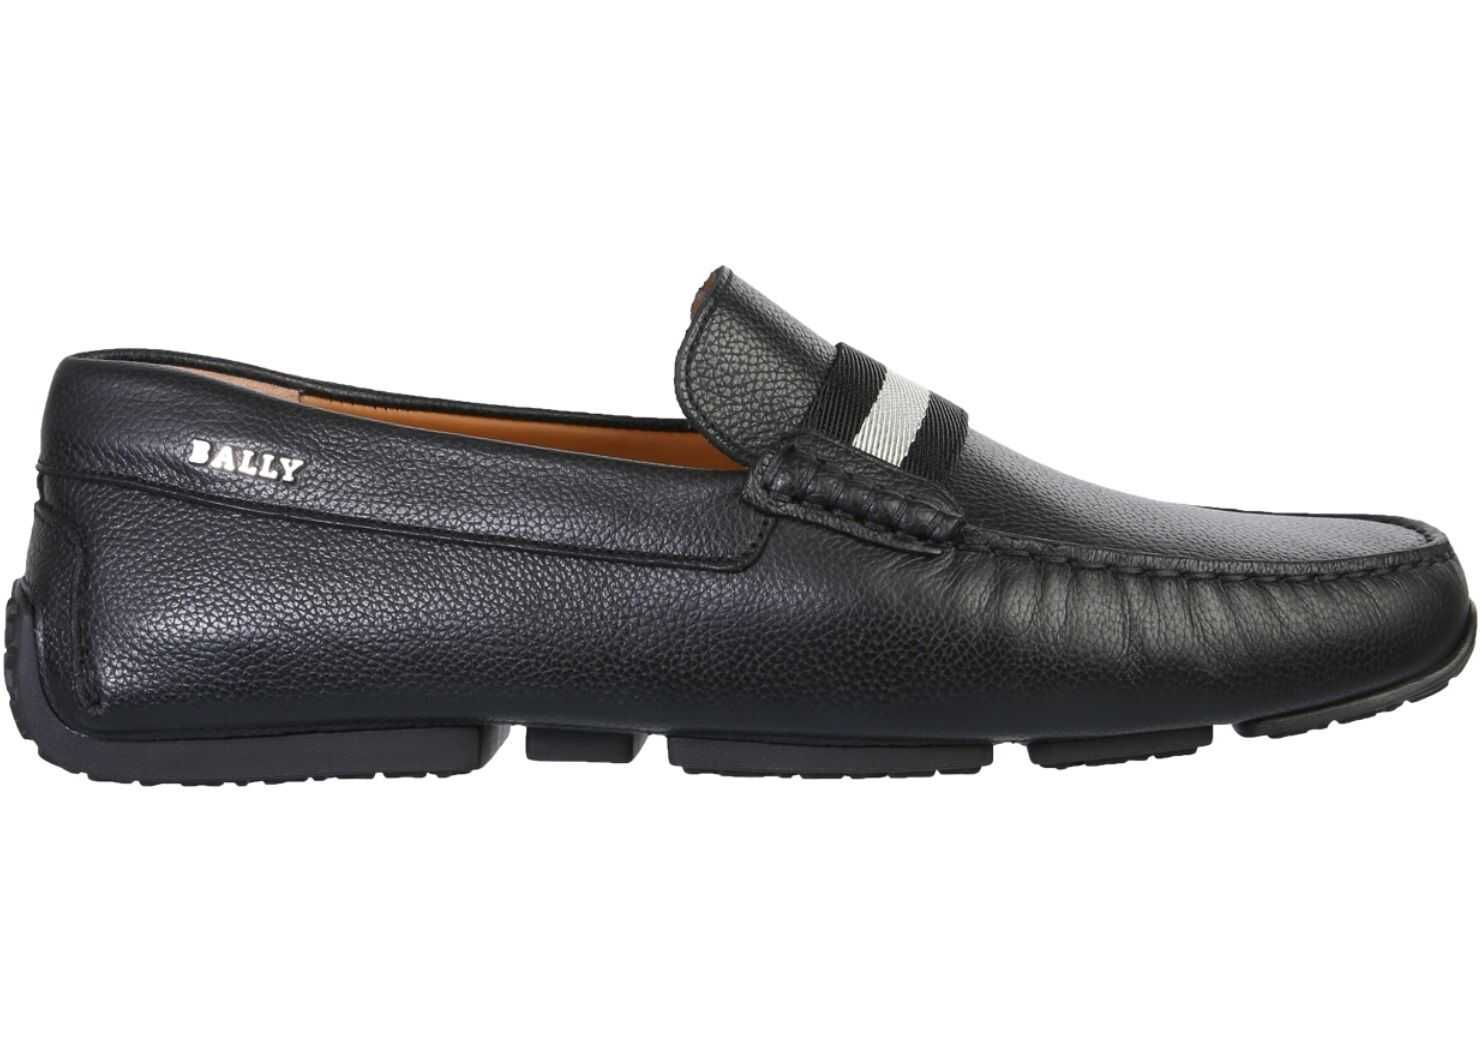 Bally Pearce Driver Moccasin BLACK